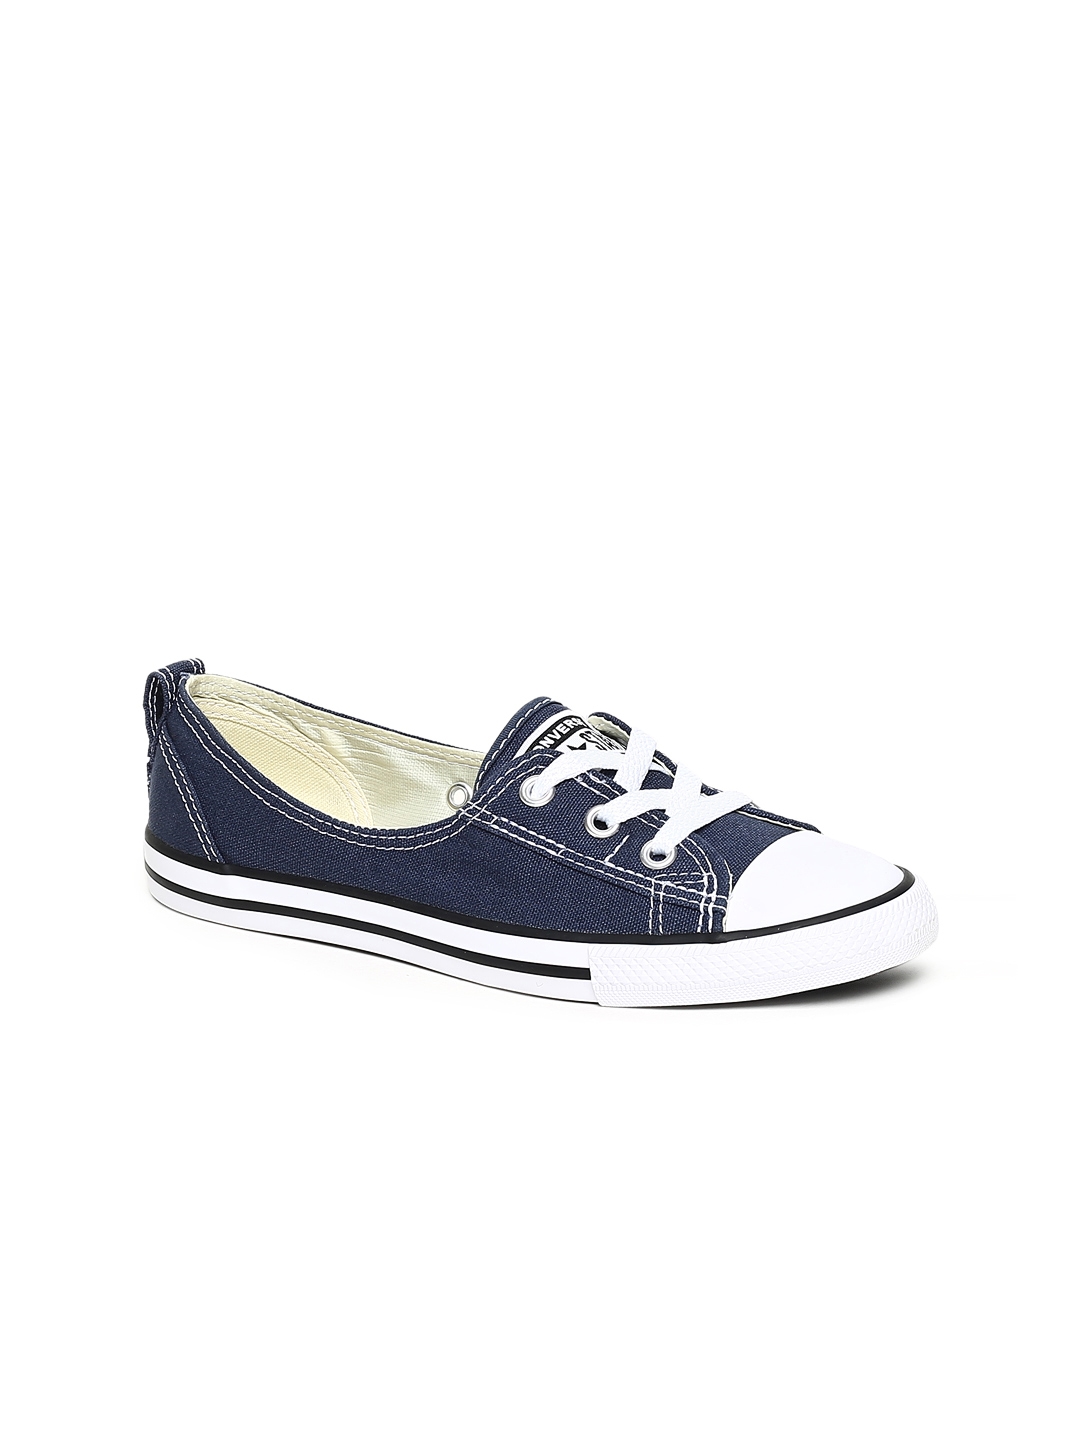 Buy Converse Core Canvas Chuck Taylor WoMen Navy Blue Sneakers - Casual Shoes  for Women 8552625 | Myntra